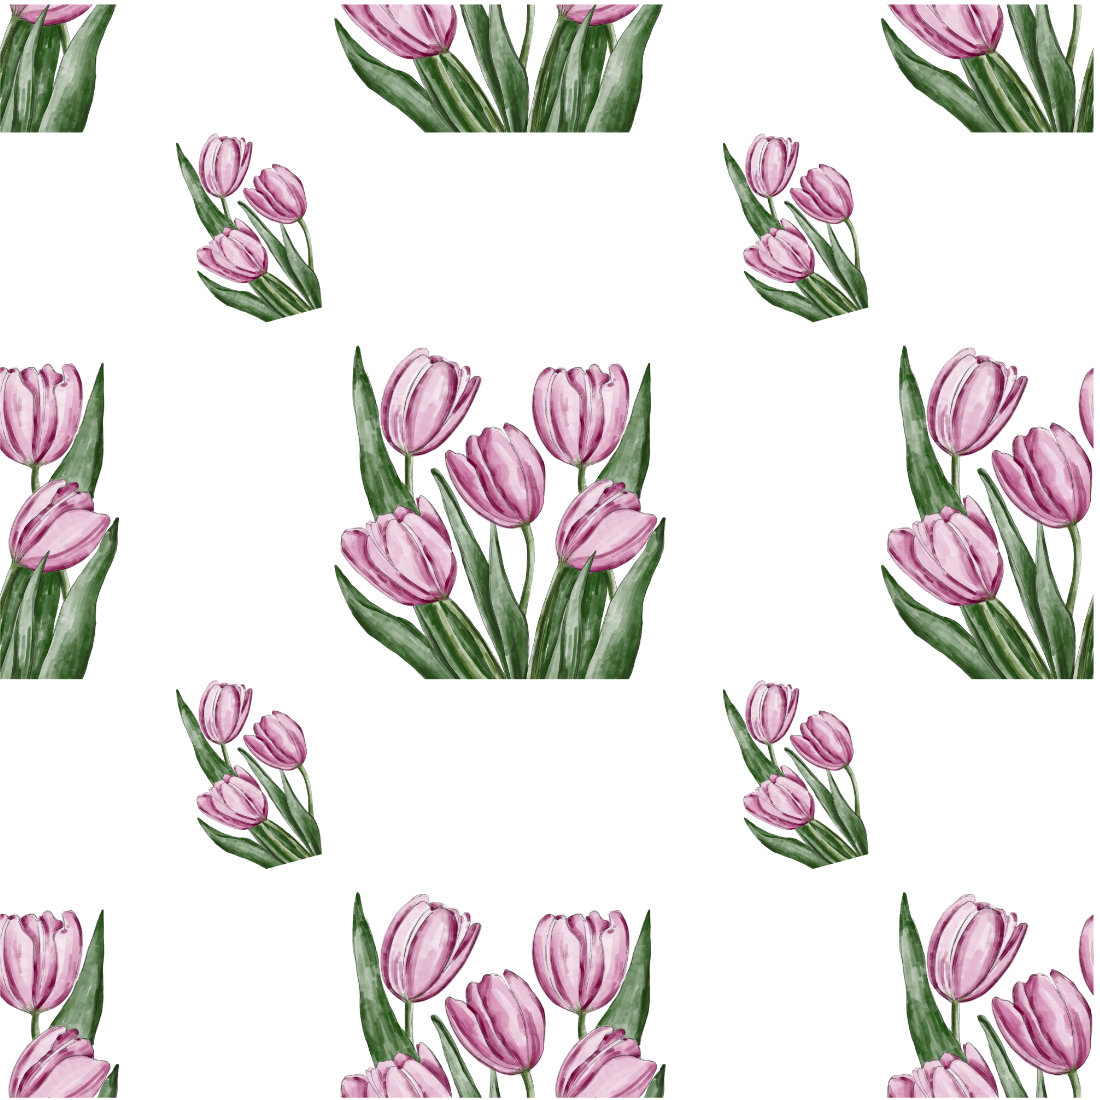 Bunch of pink tulips on a white background.